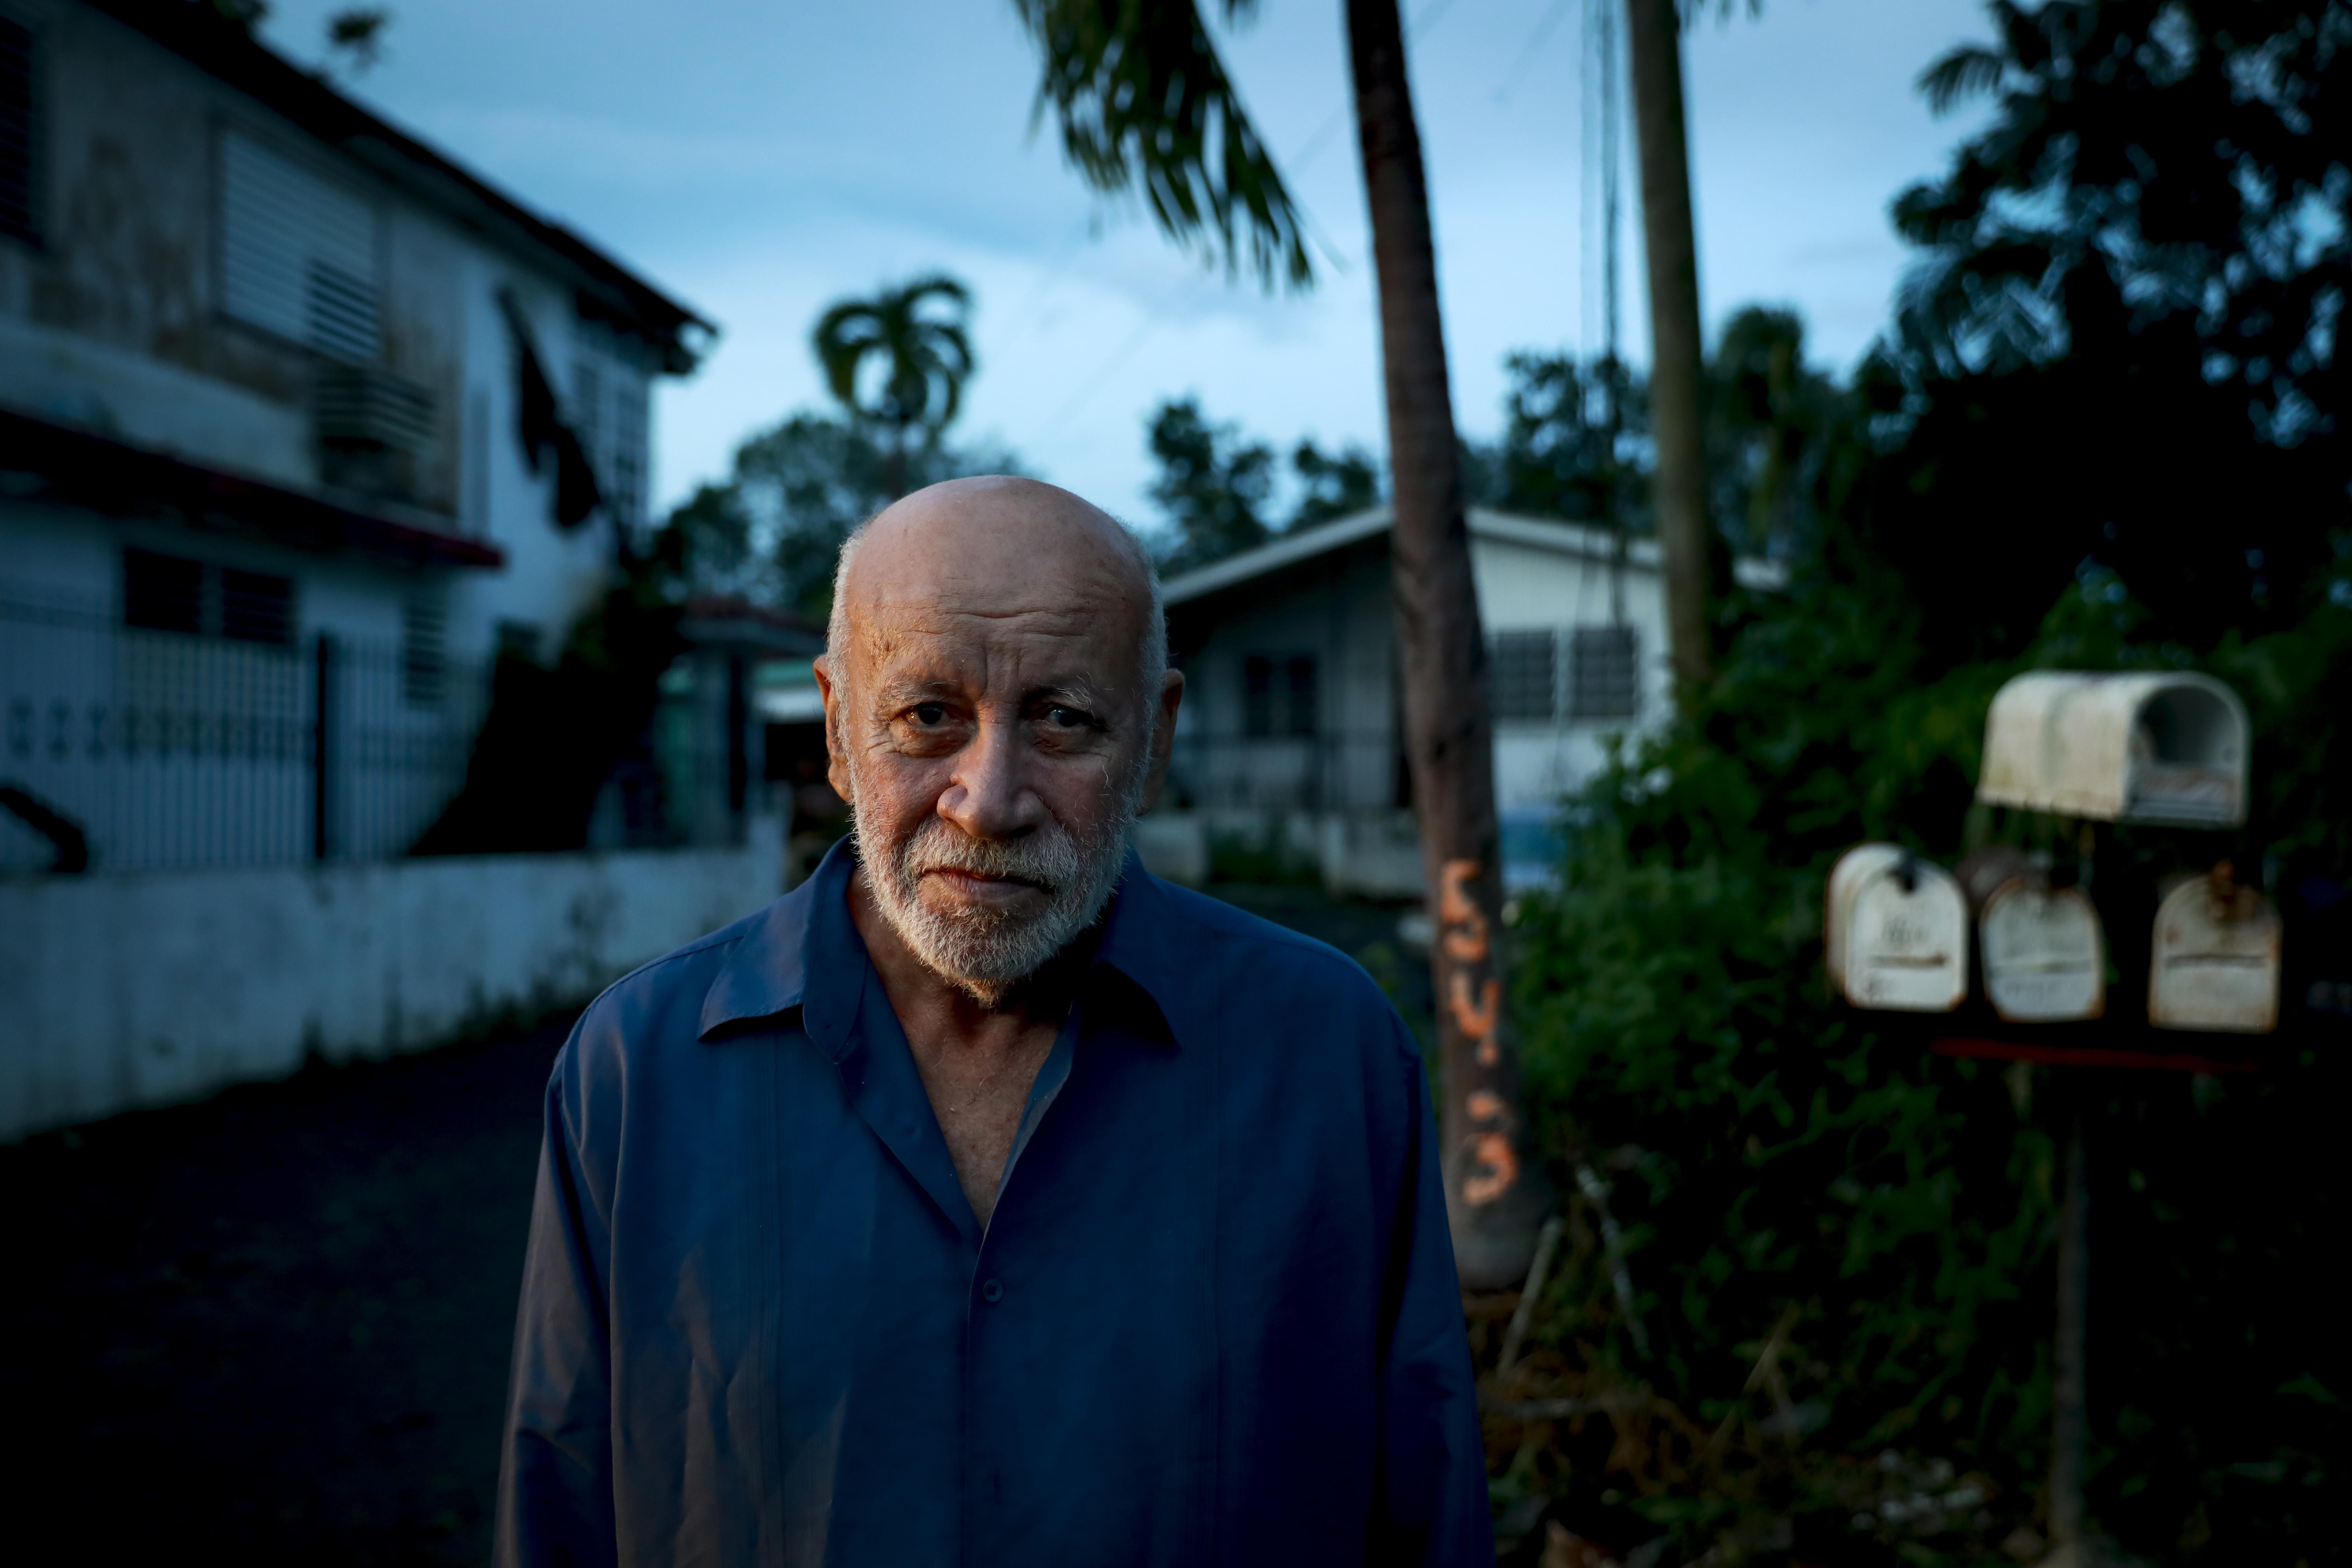 Wilson Aponte poses in front of his home on September 20, 2022 in Cabo Rojo, Puerto Rico.